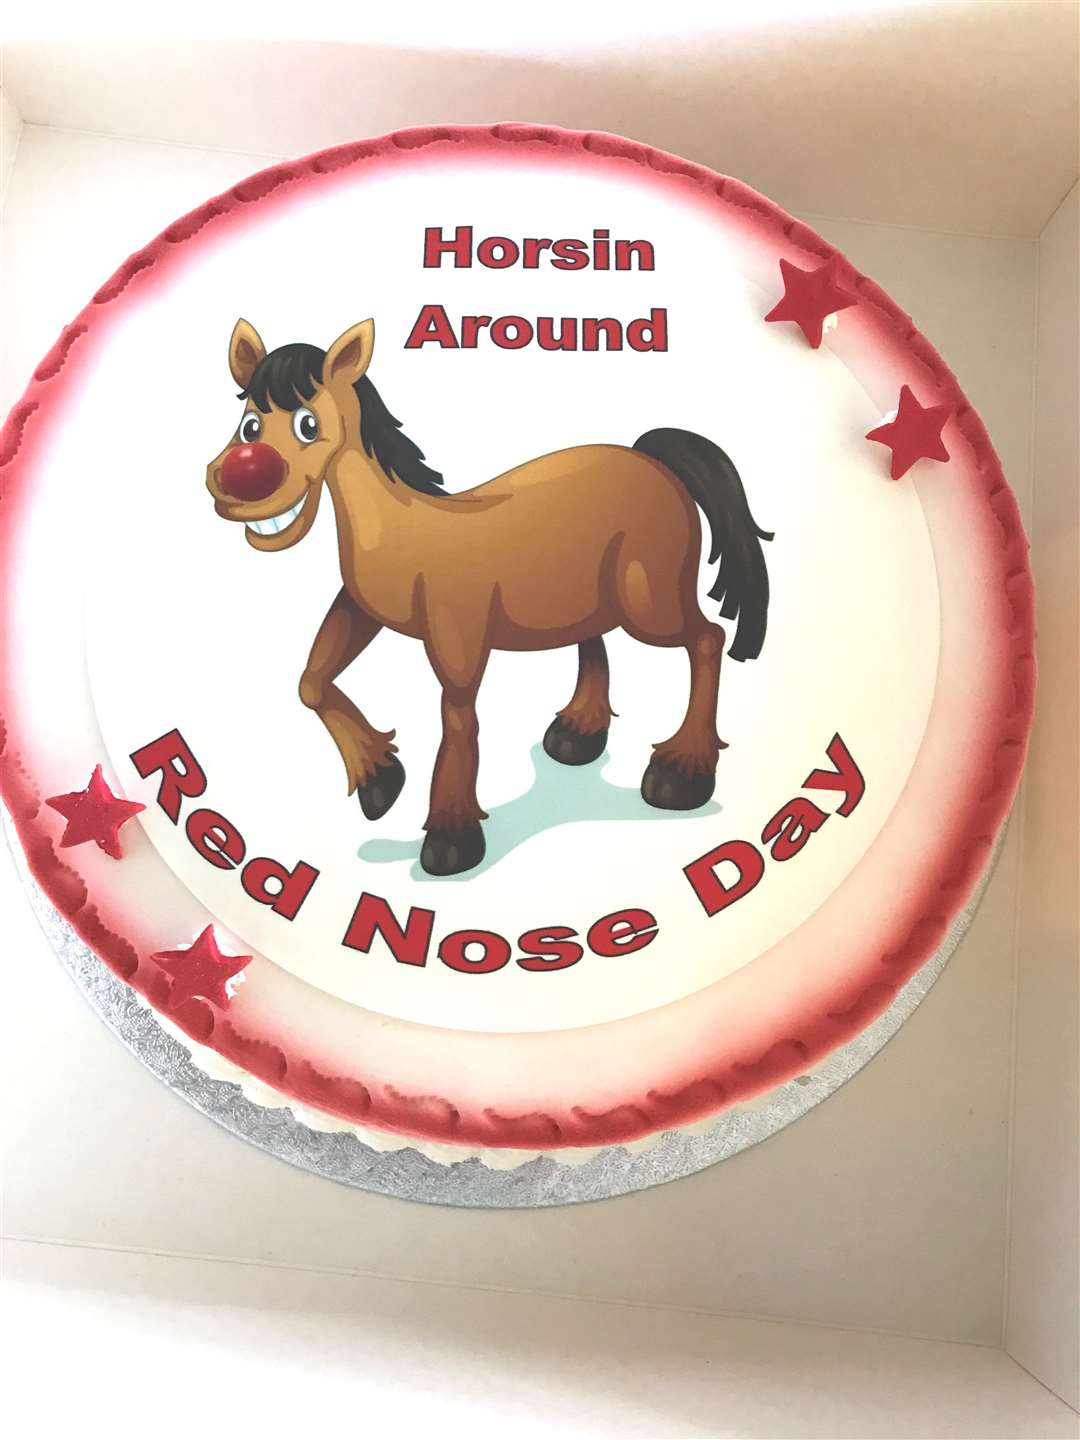 The cake featured one of Natalie's stable horses called Squire.